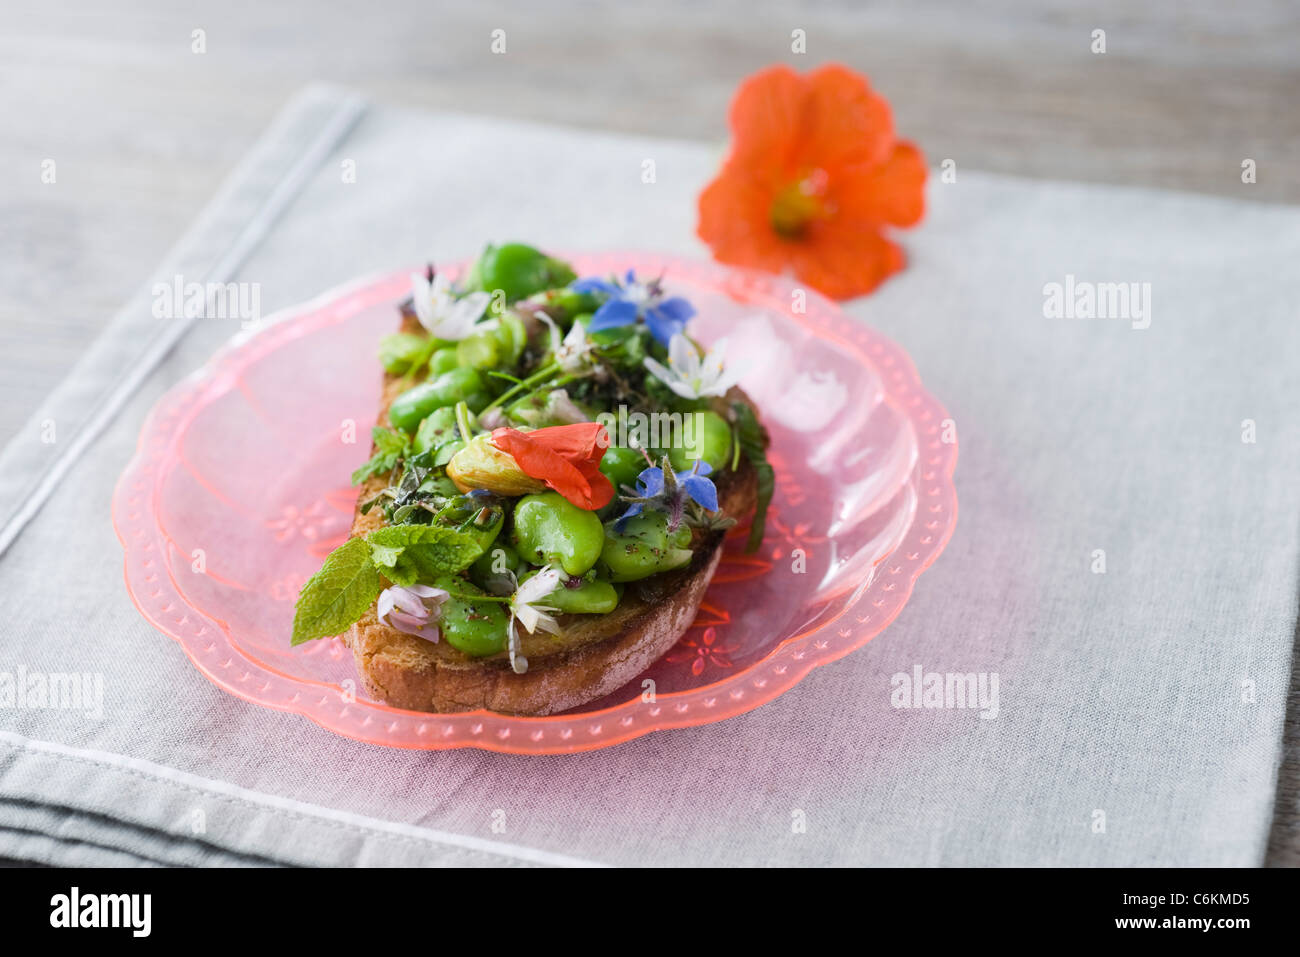 Broad bean and herb tartines with wildflowers Stock Photo